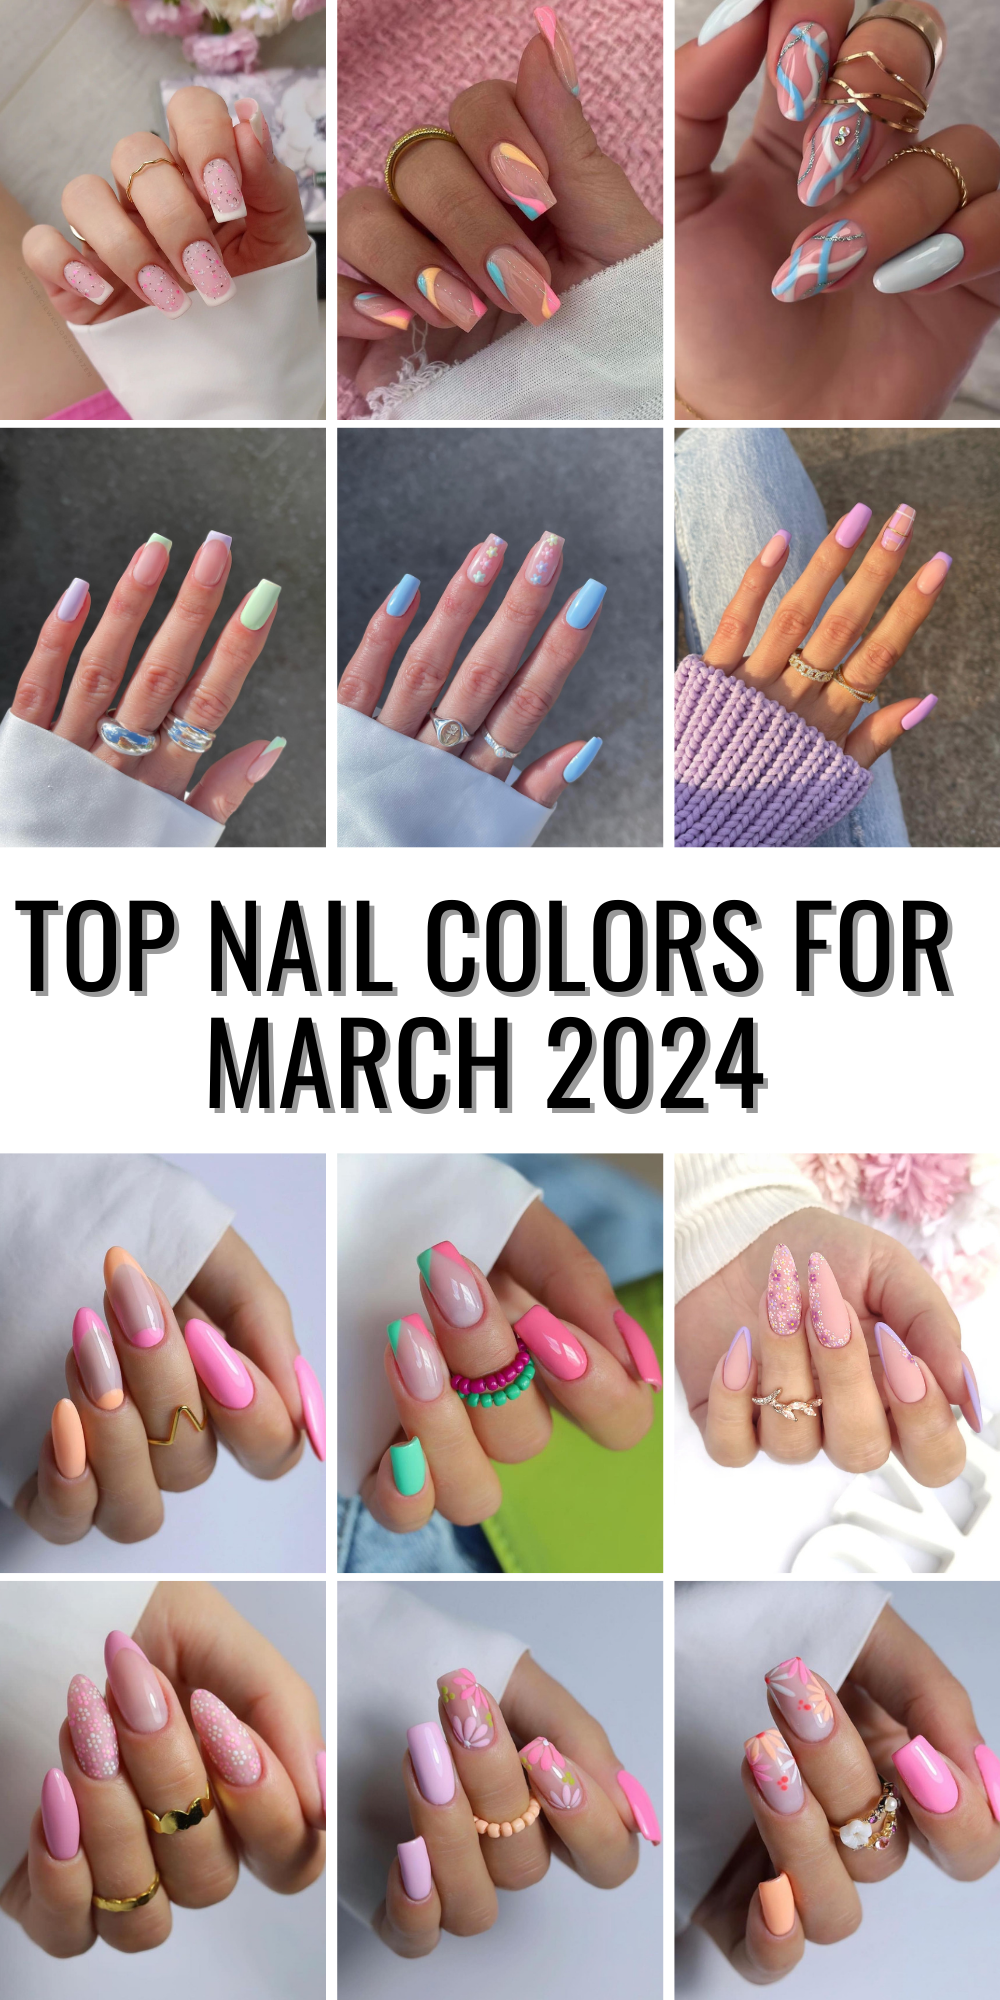 Spring's Palette Top Nail Colors for March 2024 to Refresh Your Look